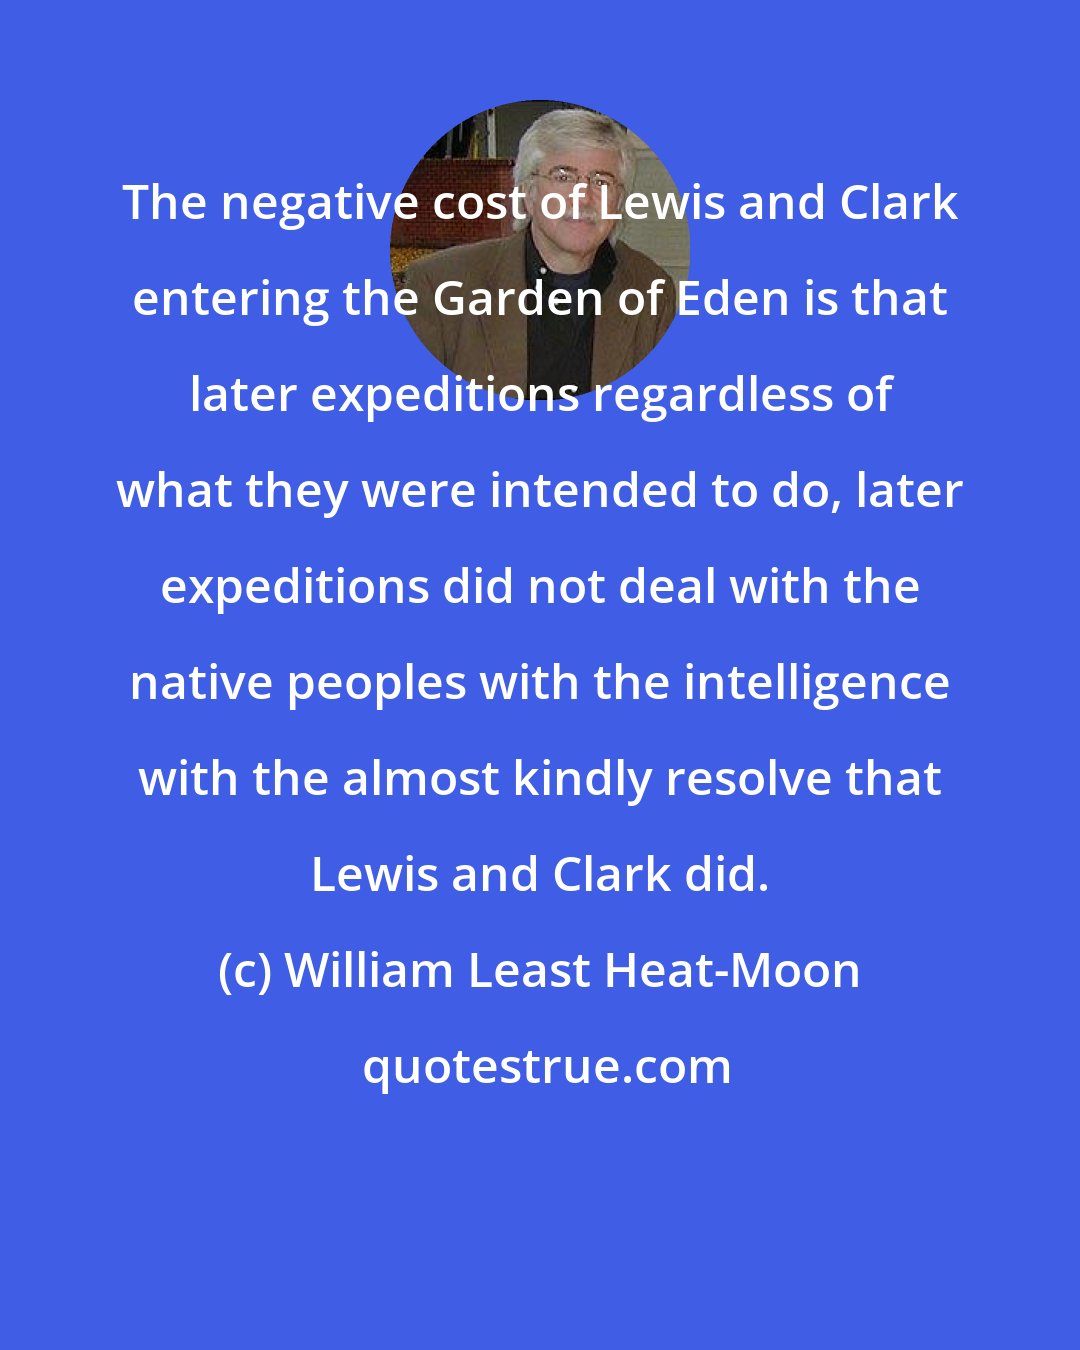 William Least Heat-Moon: The negative cost of Lewis and Clark entering the Garden of Eden is that later expeditions regardless of what they were intended to do, later expeditions did not deal with the native peoples with the intelligence with the almost kindly resolve that Lewis and Clark did.